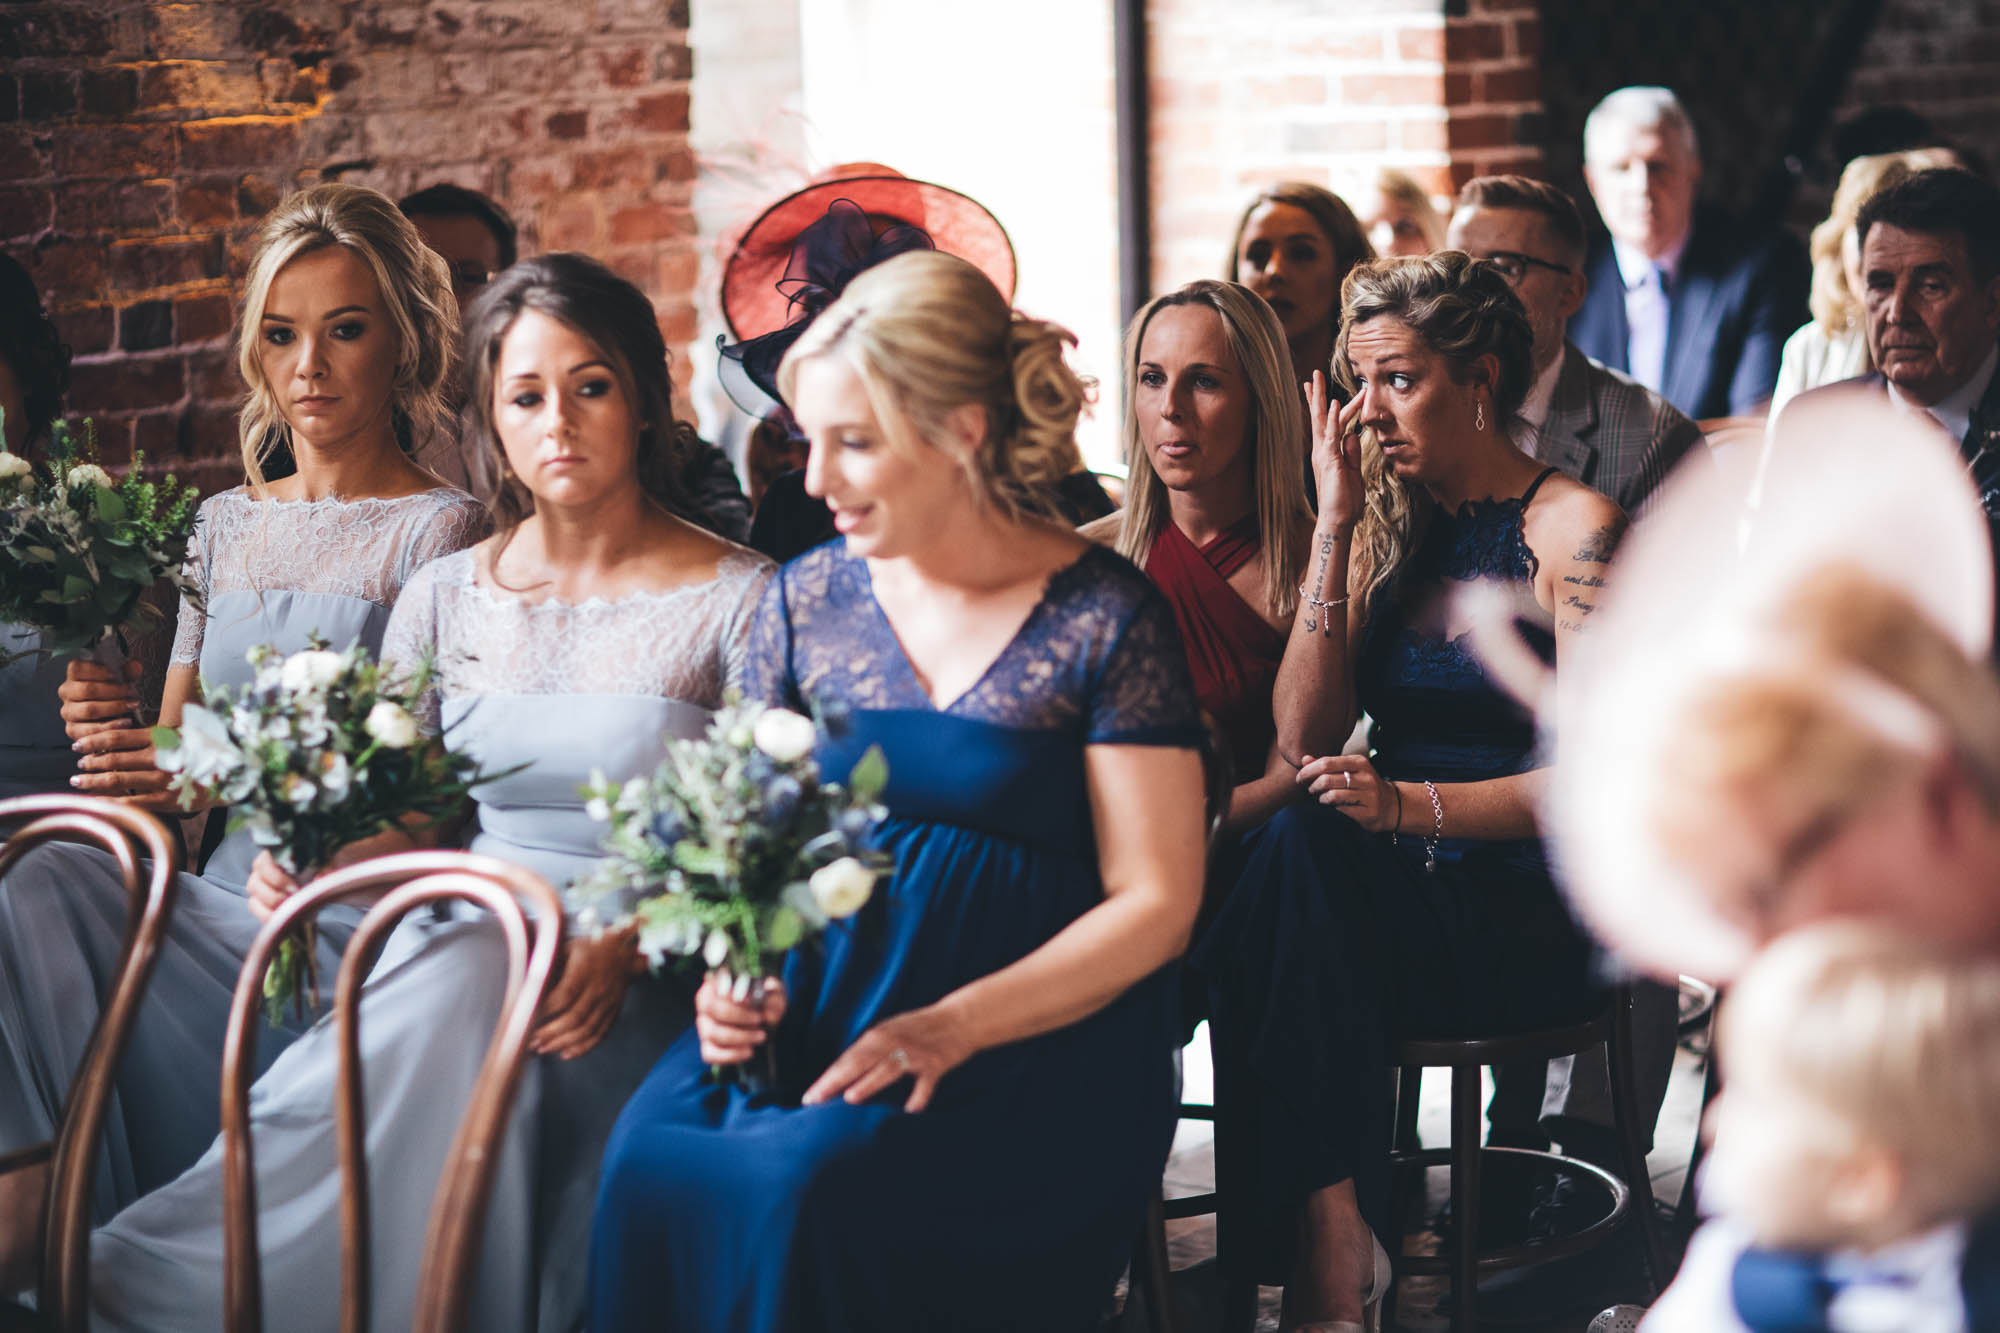 Wedding guests in a red brick rustic barn